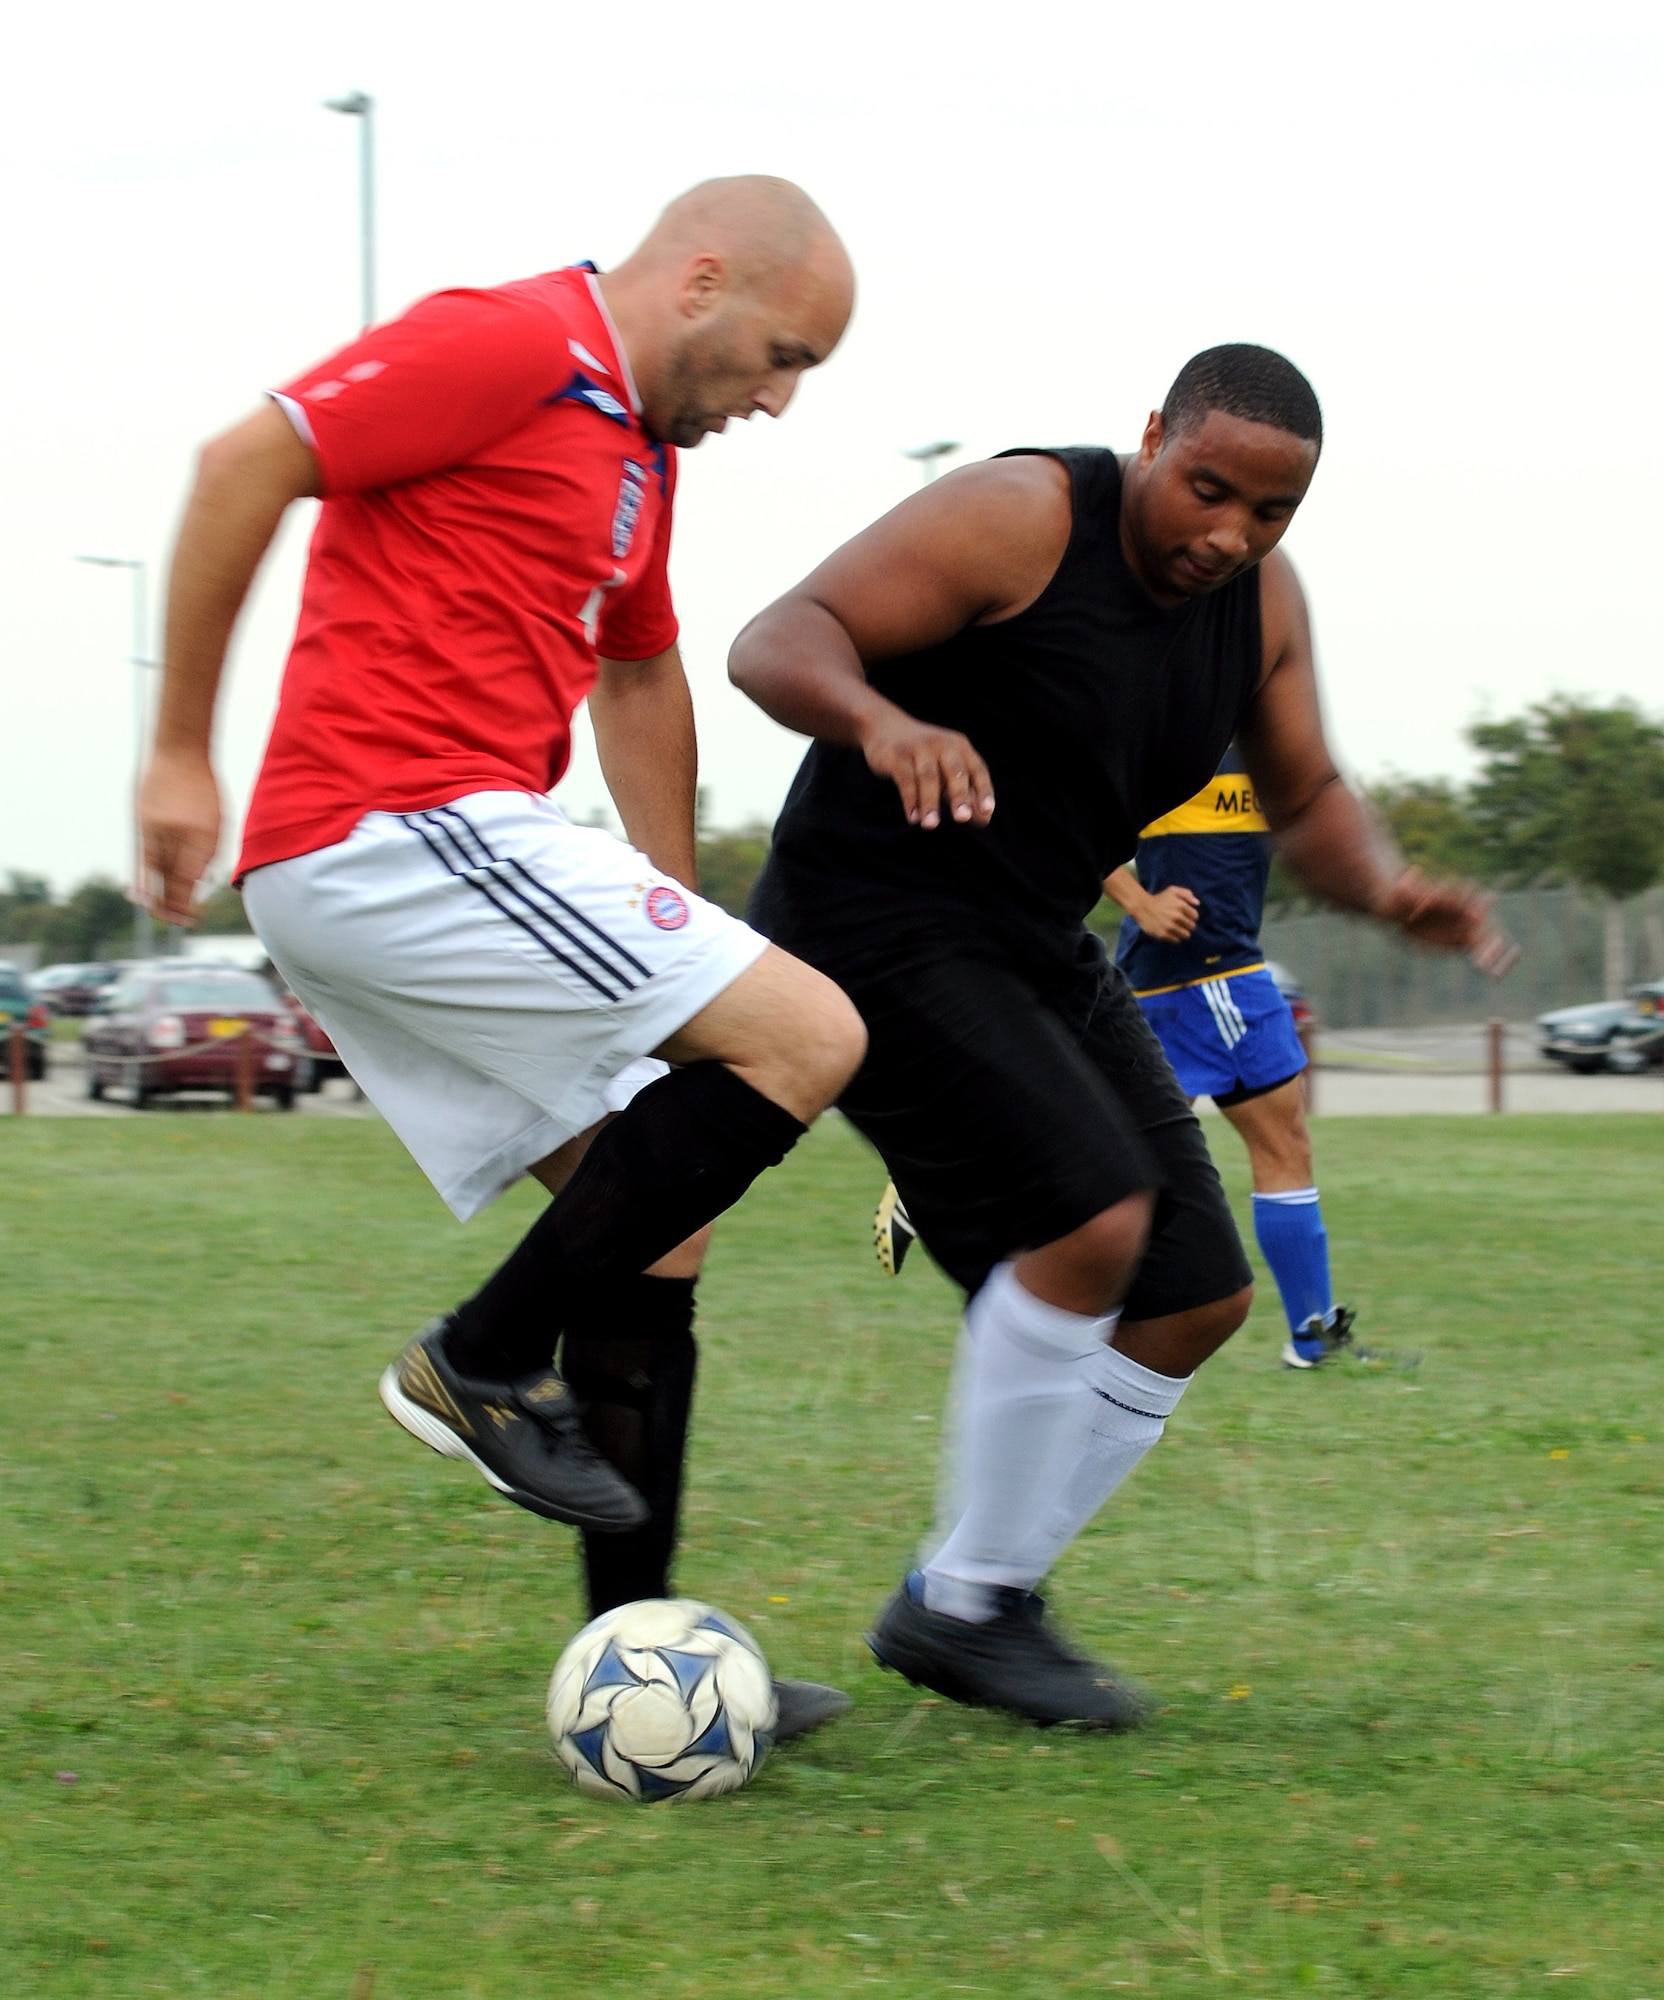 RAF MILDENHALL, England -- Forward/goalie Pete Webb (left), 727th Air Mobility Squadron, attempts to edge out defender Johnathon Bailey, 100th Logistics Readiness Squadron, during their maiden Mildenhall Intramural Outdoor Soccer league game Aug. 24 at the southside soccer fields. Due to the 727th AMS' trivial five-player lineup, Webb pulled out of the goal to help play the seven-player strong 100th LRS. The 4-0 game was eventually called at halftime. Anyone interested in the league should contact the Northside Fitness Center at DSN 238-2349. (U.S. Air Force photo by Senior Airman Thomas Trower)